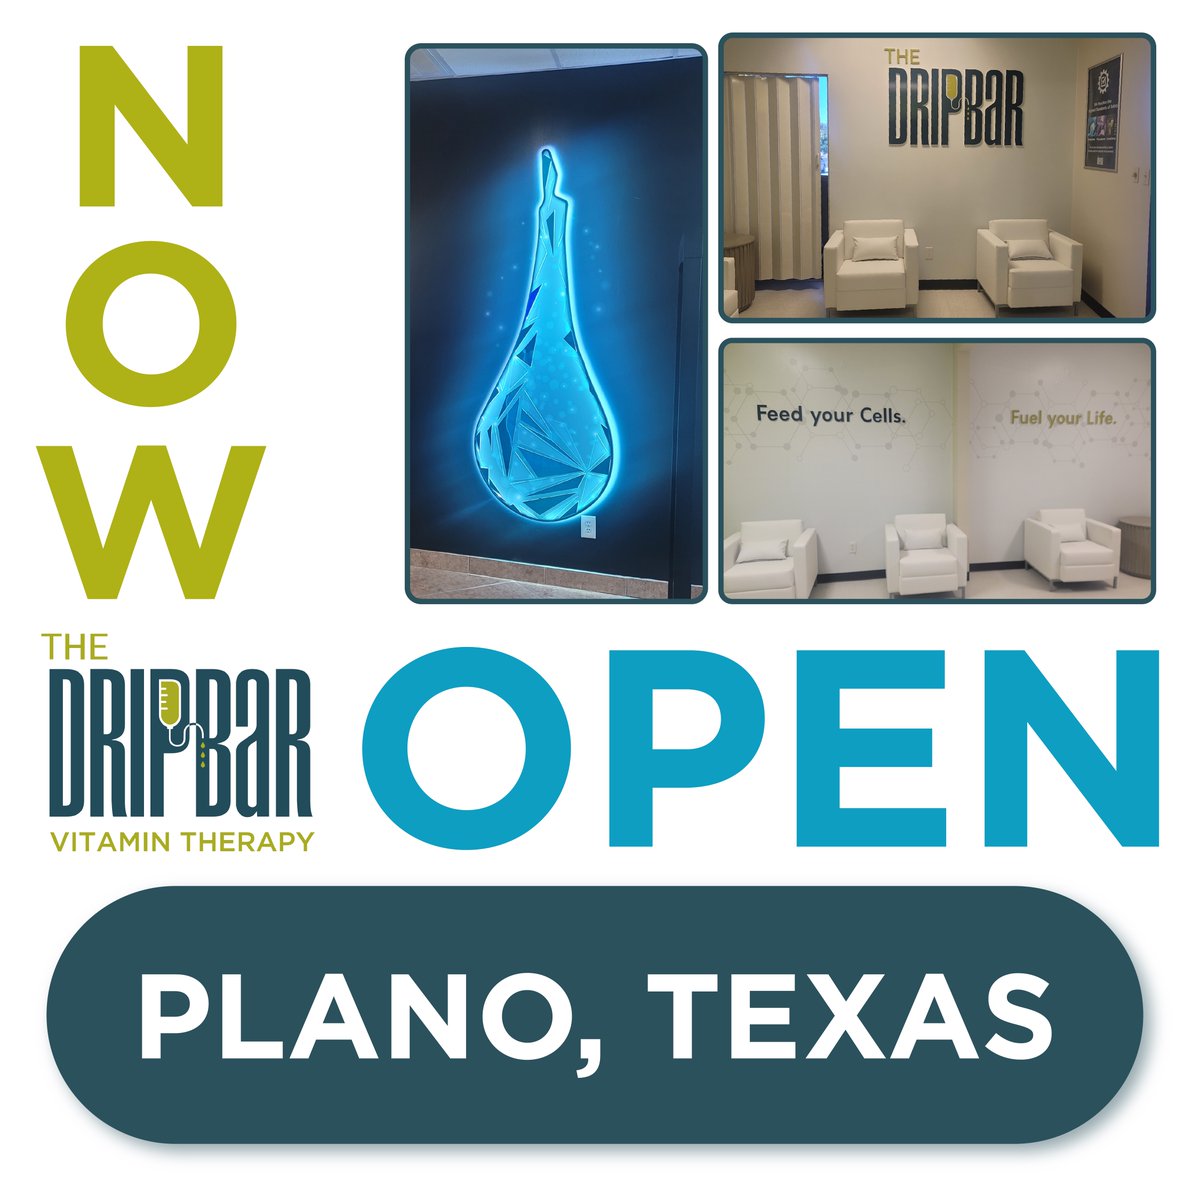 We are so excited to announce The DRIPBaR is NOW OPEN in Plano, Texas, proudly serving the Dallas and Collin County area! See you real soon at The DRIPBaR Plano. #TheDRIPBaRPlano #Plano #NowOpen #IVDrips #VitaminTherapy #VitaminInfusions #PlanoTX #TheDRIPBaR